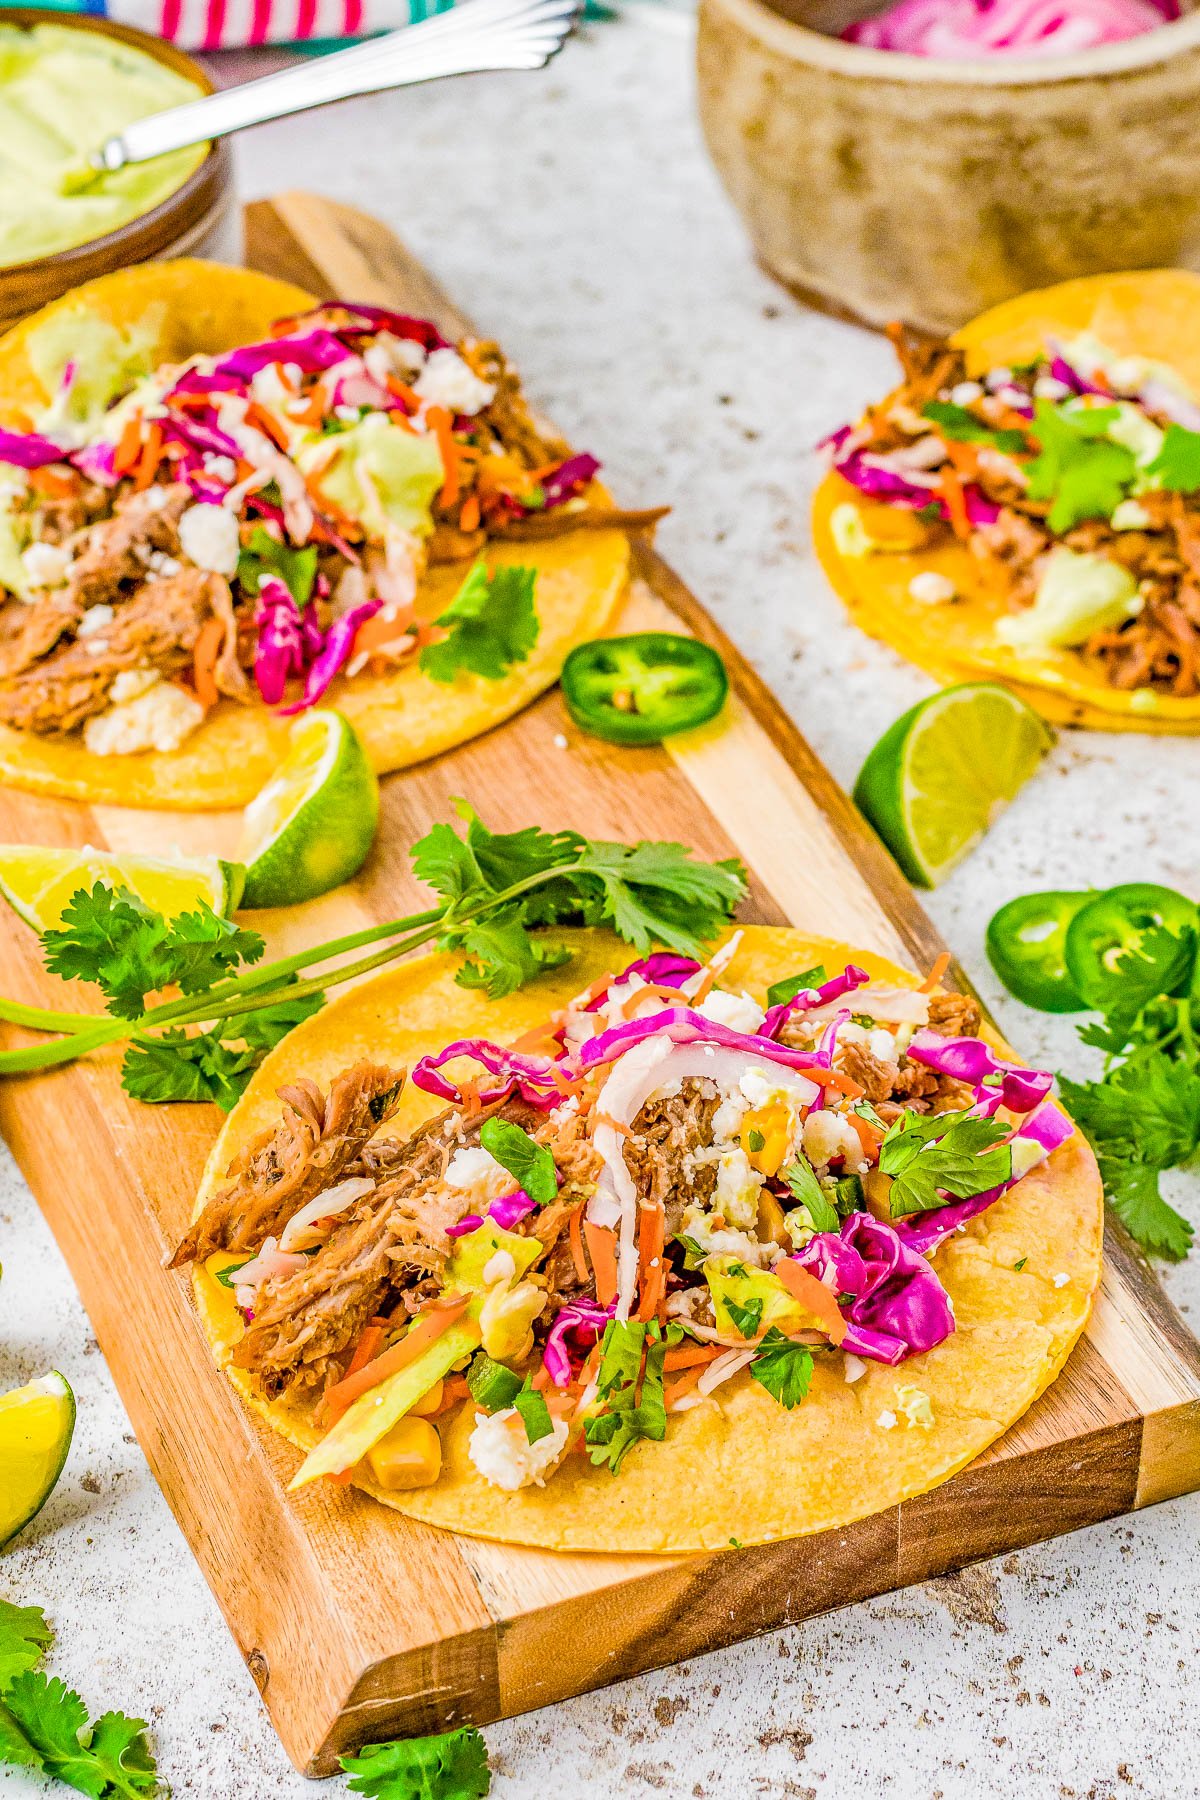 Pulled Pork Tacos - The BEST pulled pork tacos made with slow cooker pulled pork, nestled in tortillas, and then topped in abundance with Cilantro Lime Slaw, Pickled Red Onions, and Avocado Crema! Learn how to make these Mexican-inspired classic recipes at home! Easy enough for weeknights but also great for events, game day parties, get-togethers like Cinco de Mayo fiestas or graduation parties! 